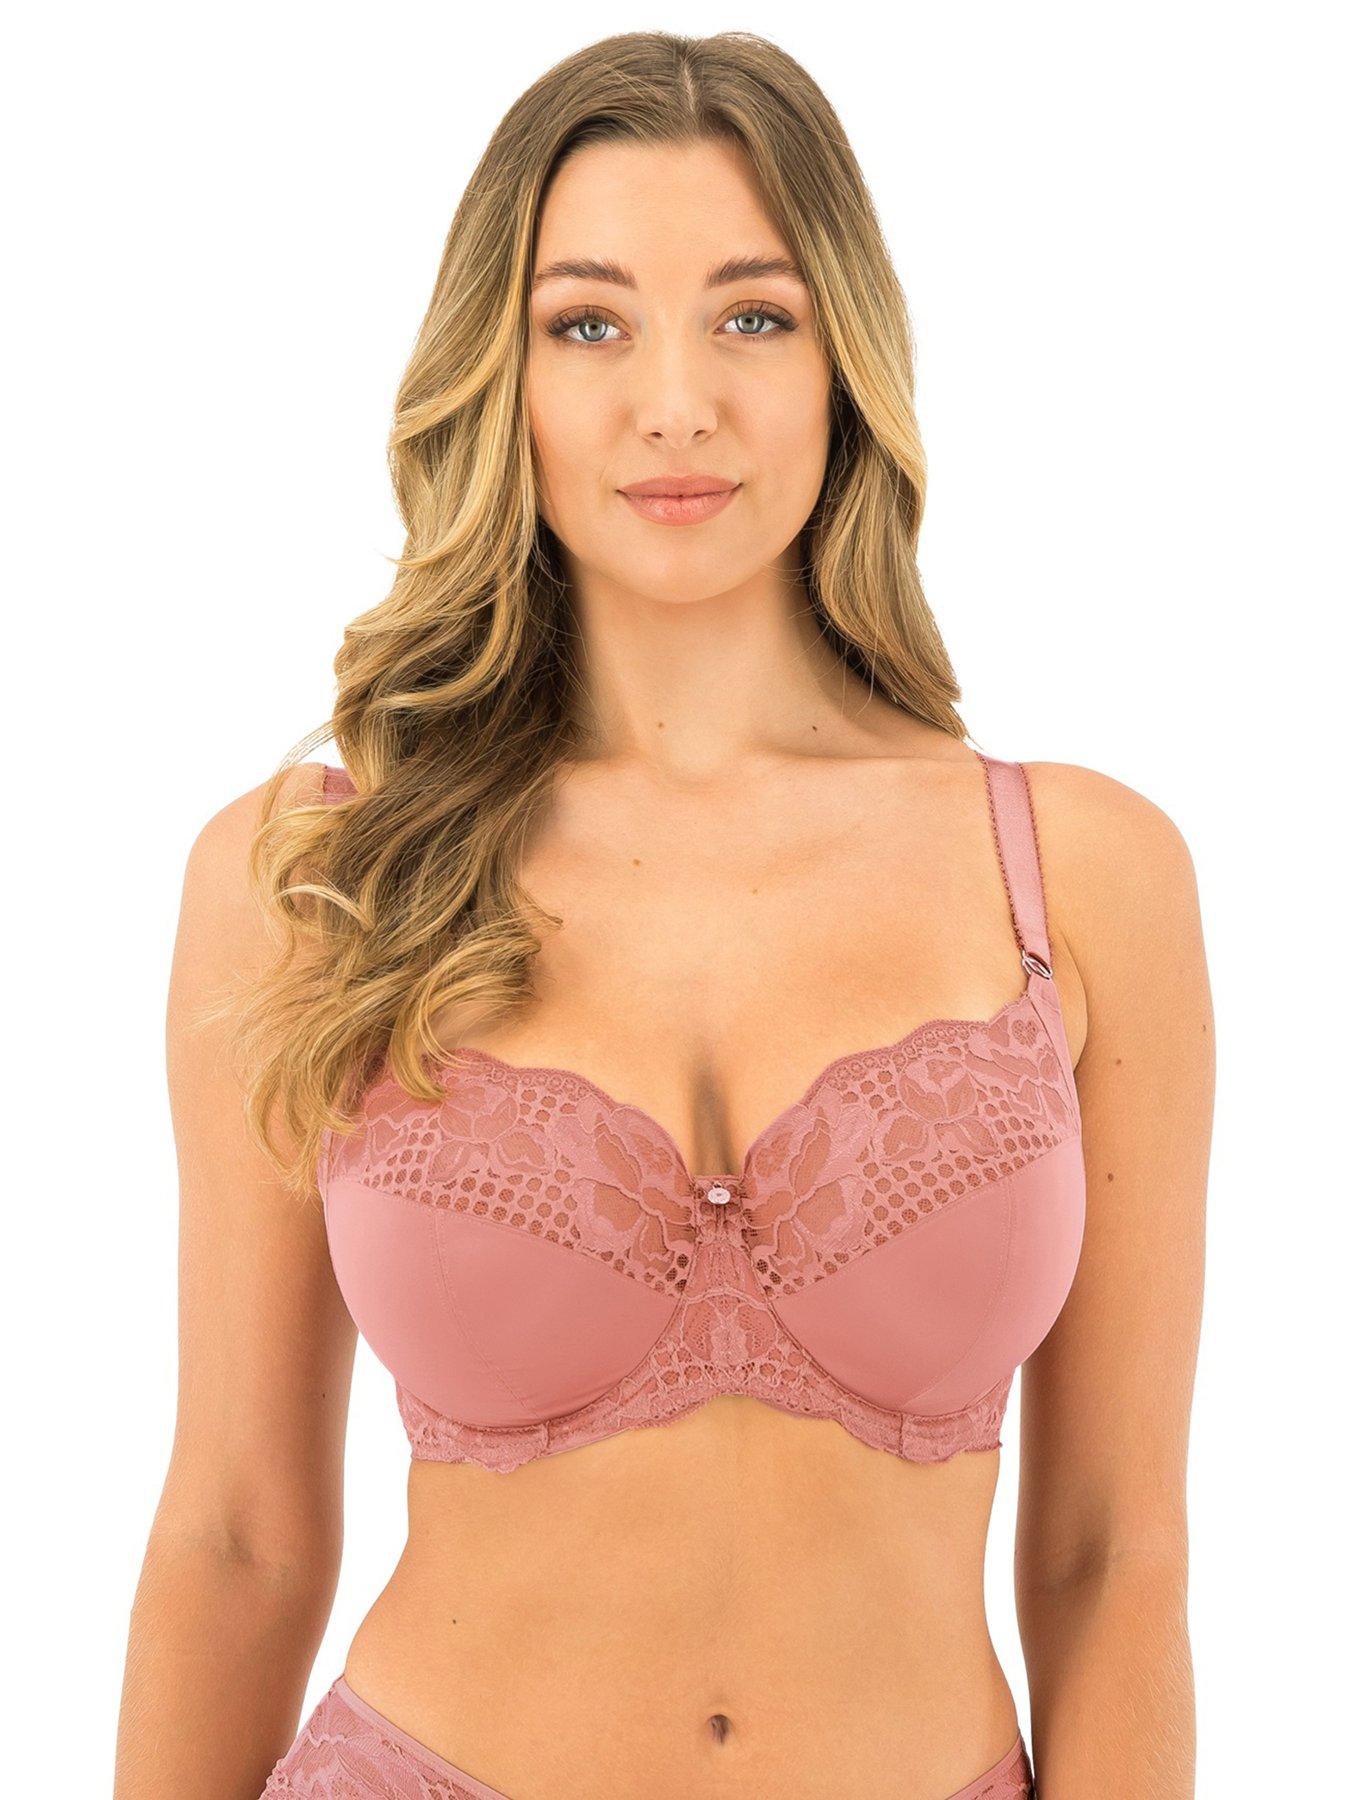 Classic bra, partially sheer cups, floral lace, small dots, B to N-cup